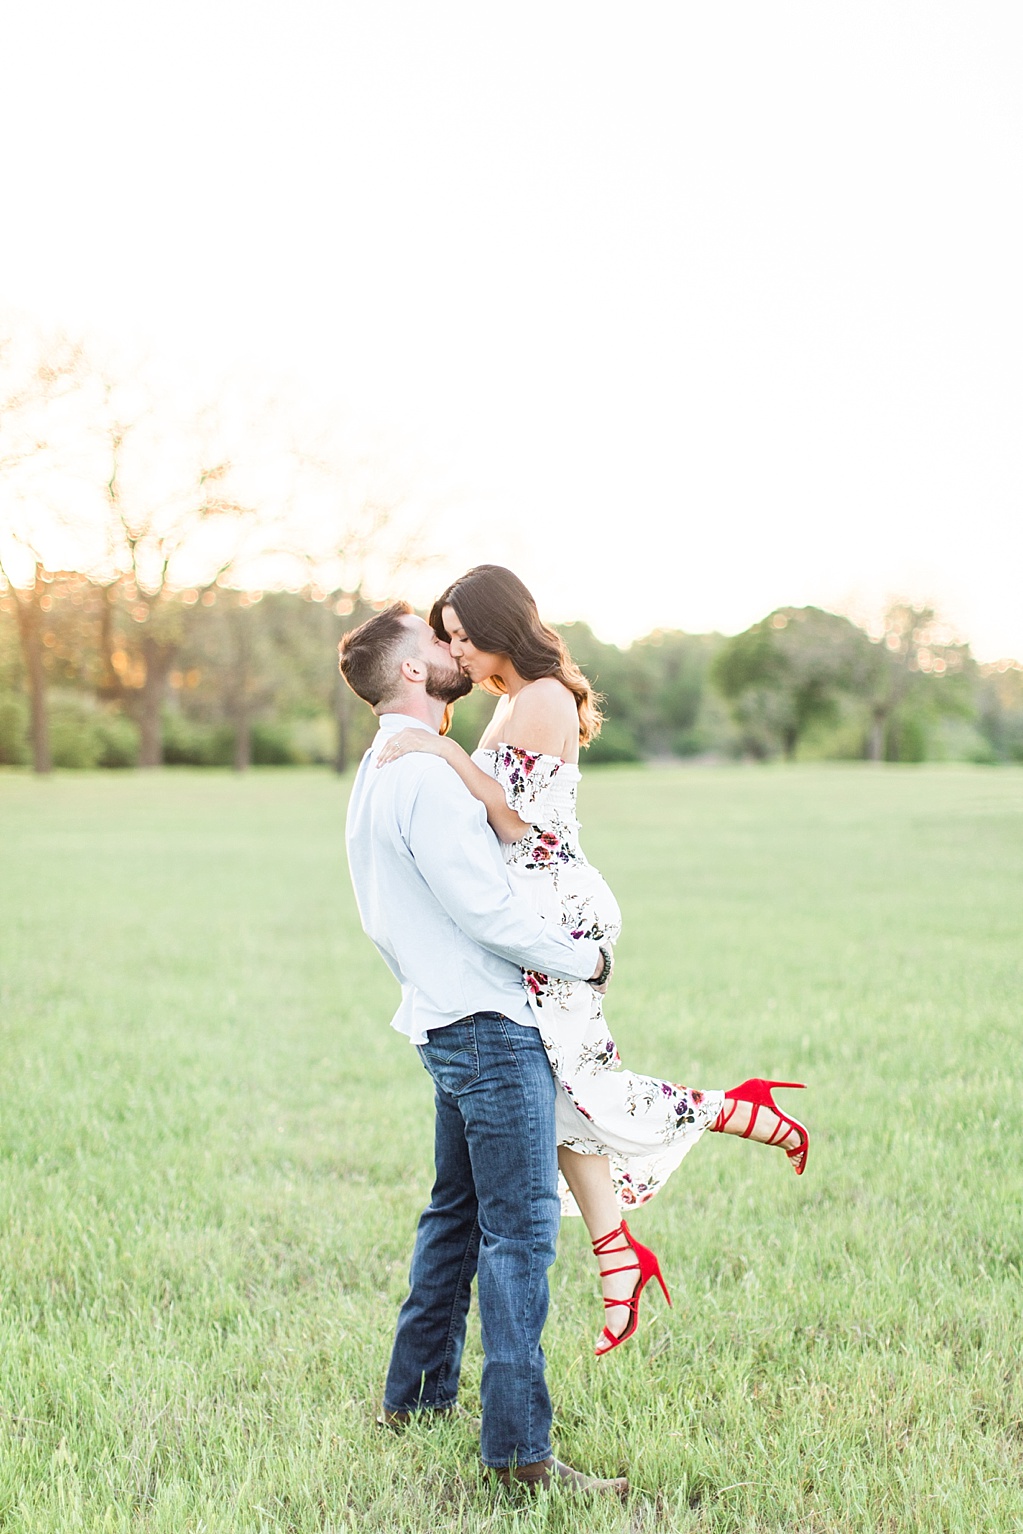 Eagle Dancer Ranch Engagement Photo Session in Boerne, Texas by Allison Jeffers Photography 0049